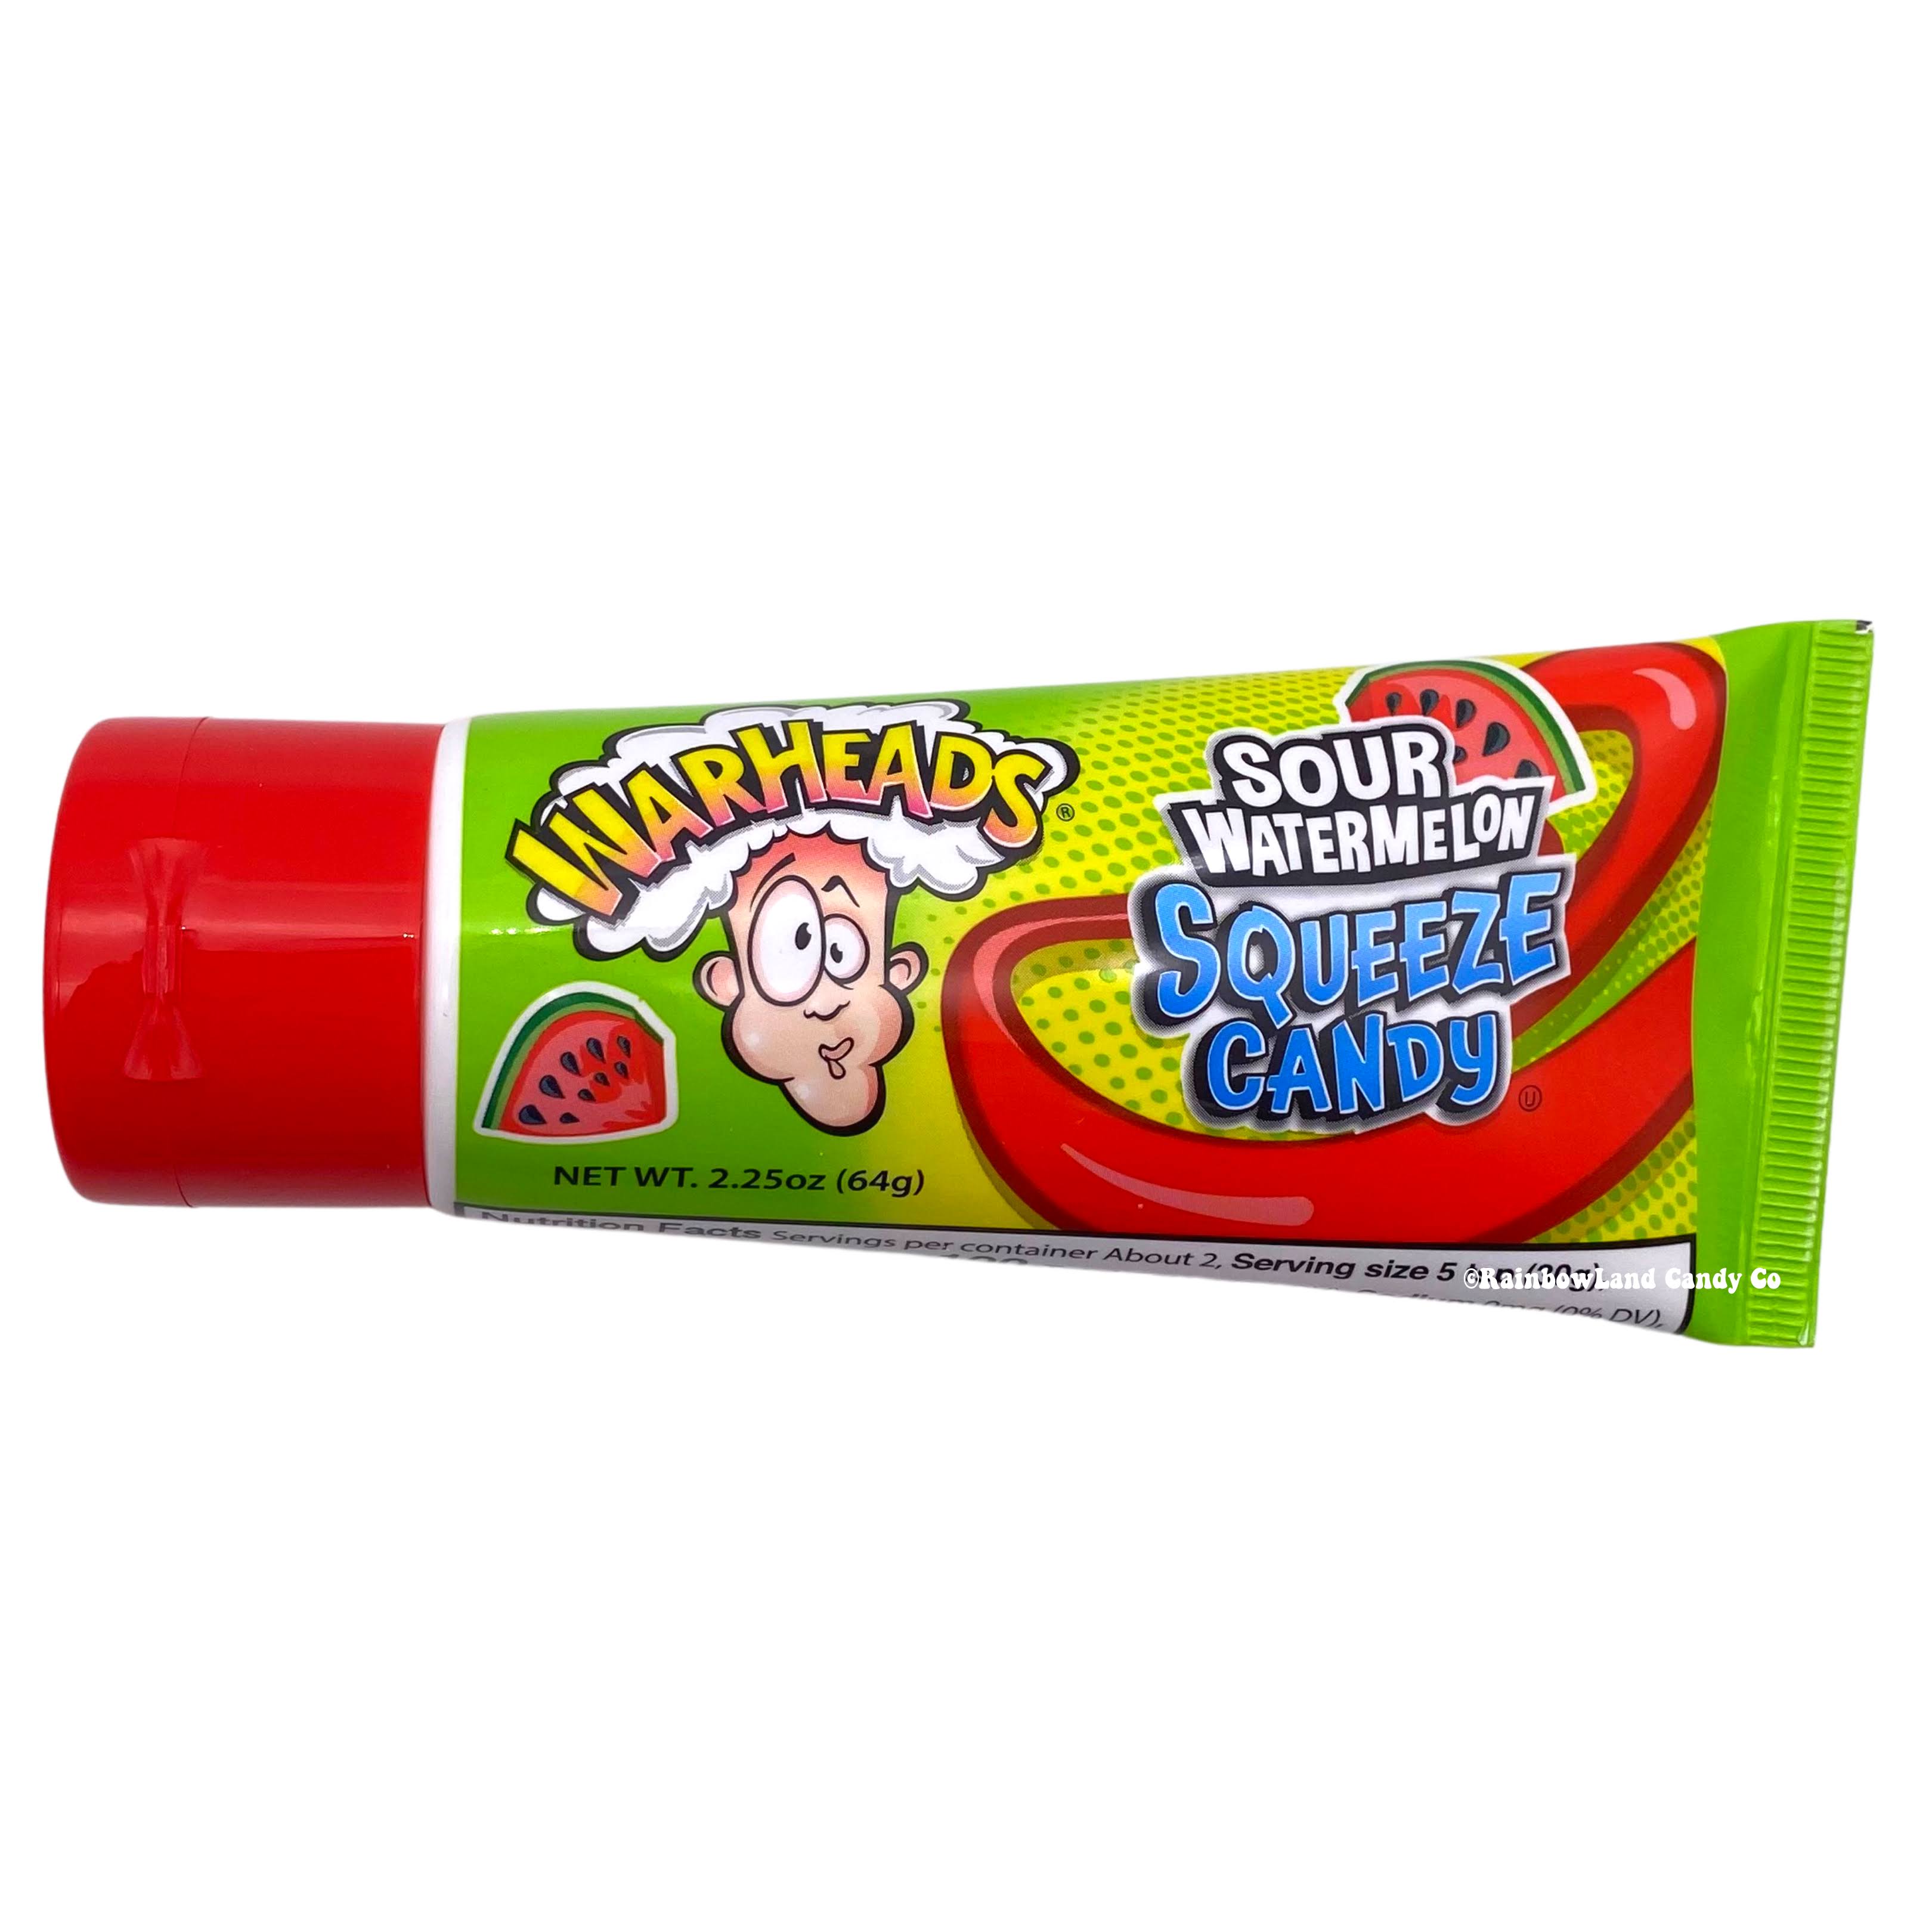 Warheads Squeeze Candy, Sour Watermelon - 2.25 oz